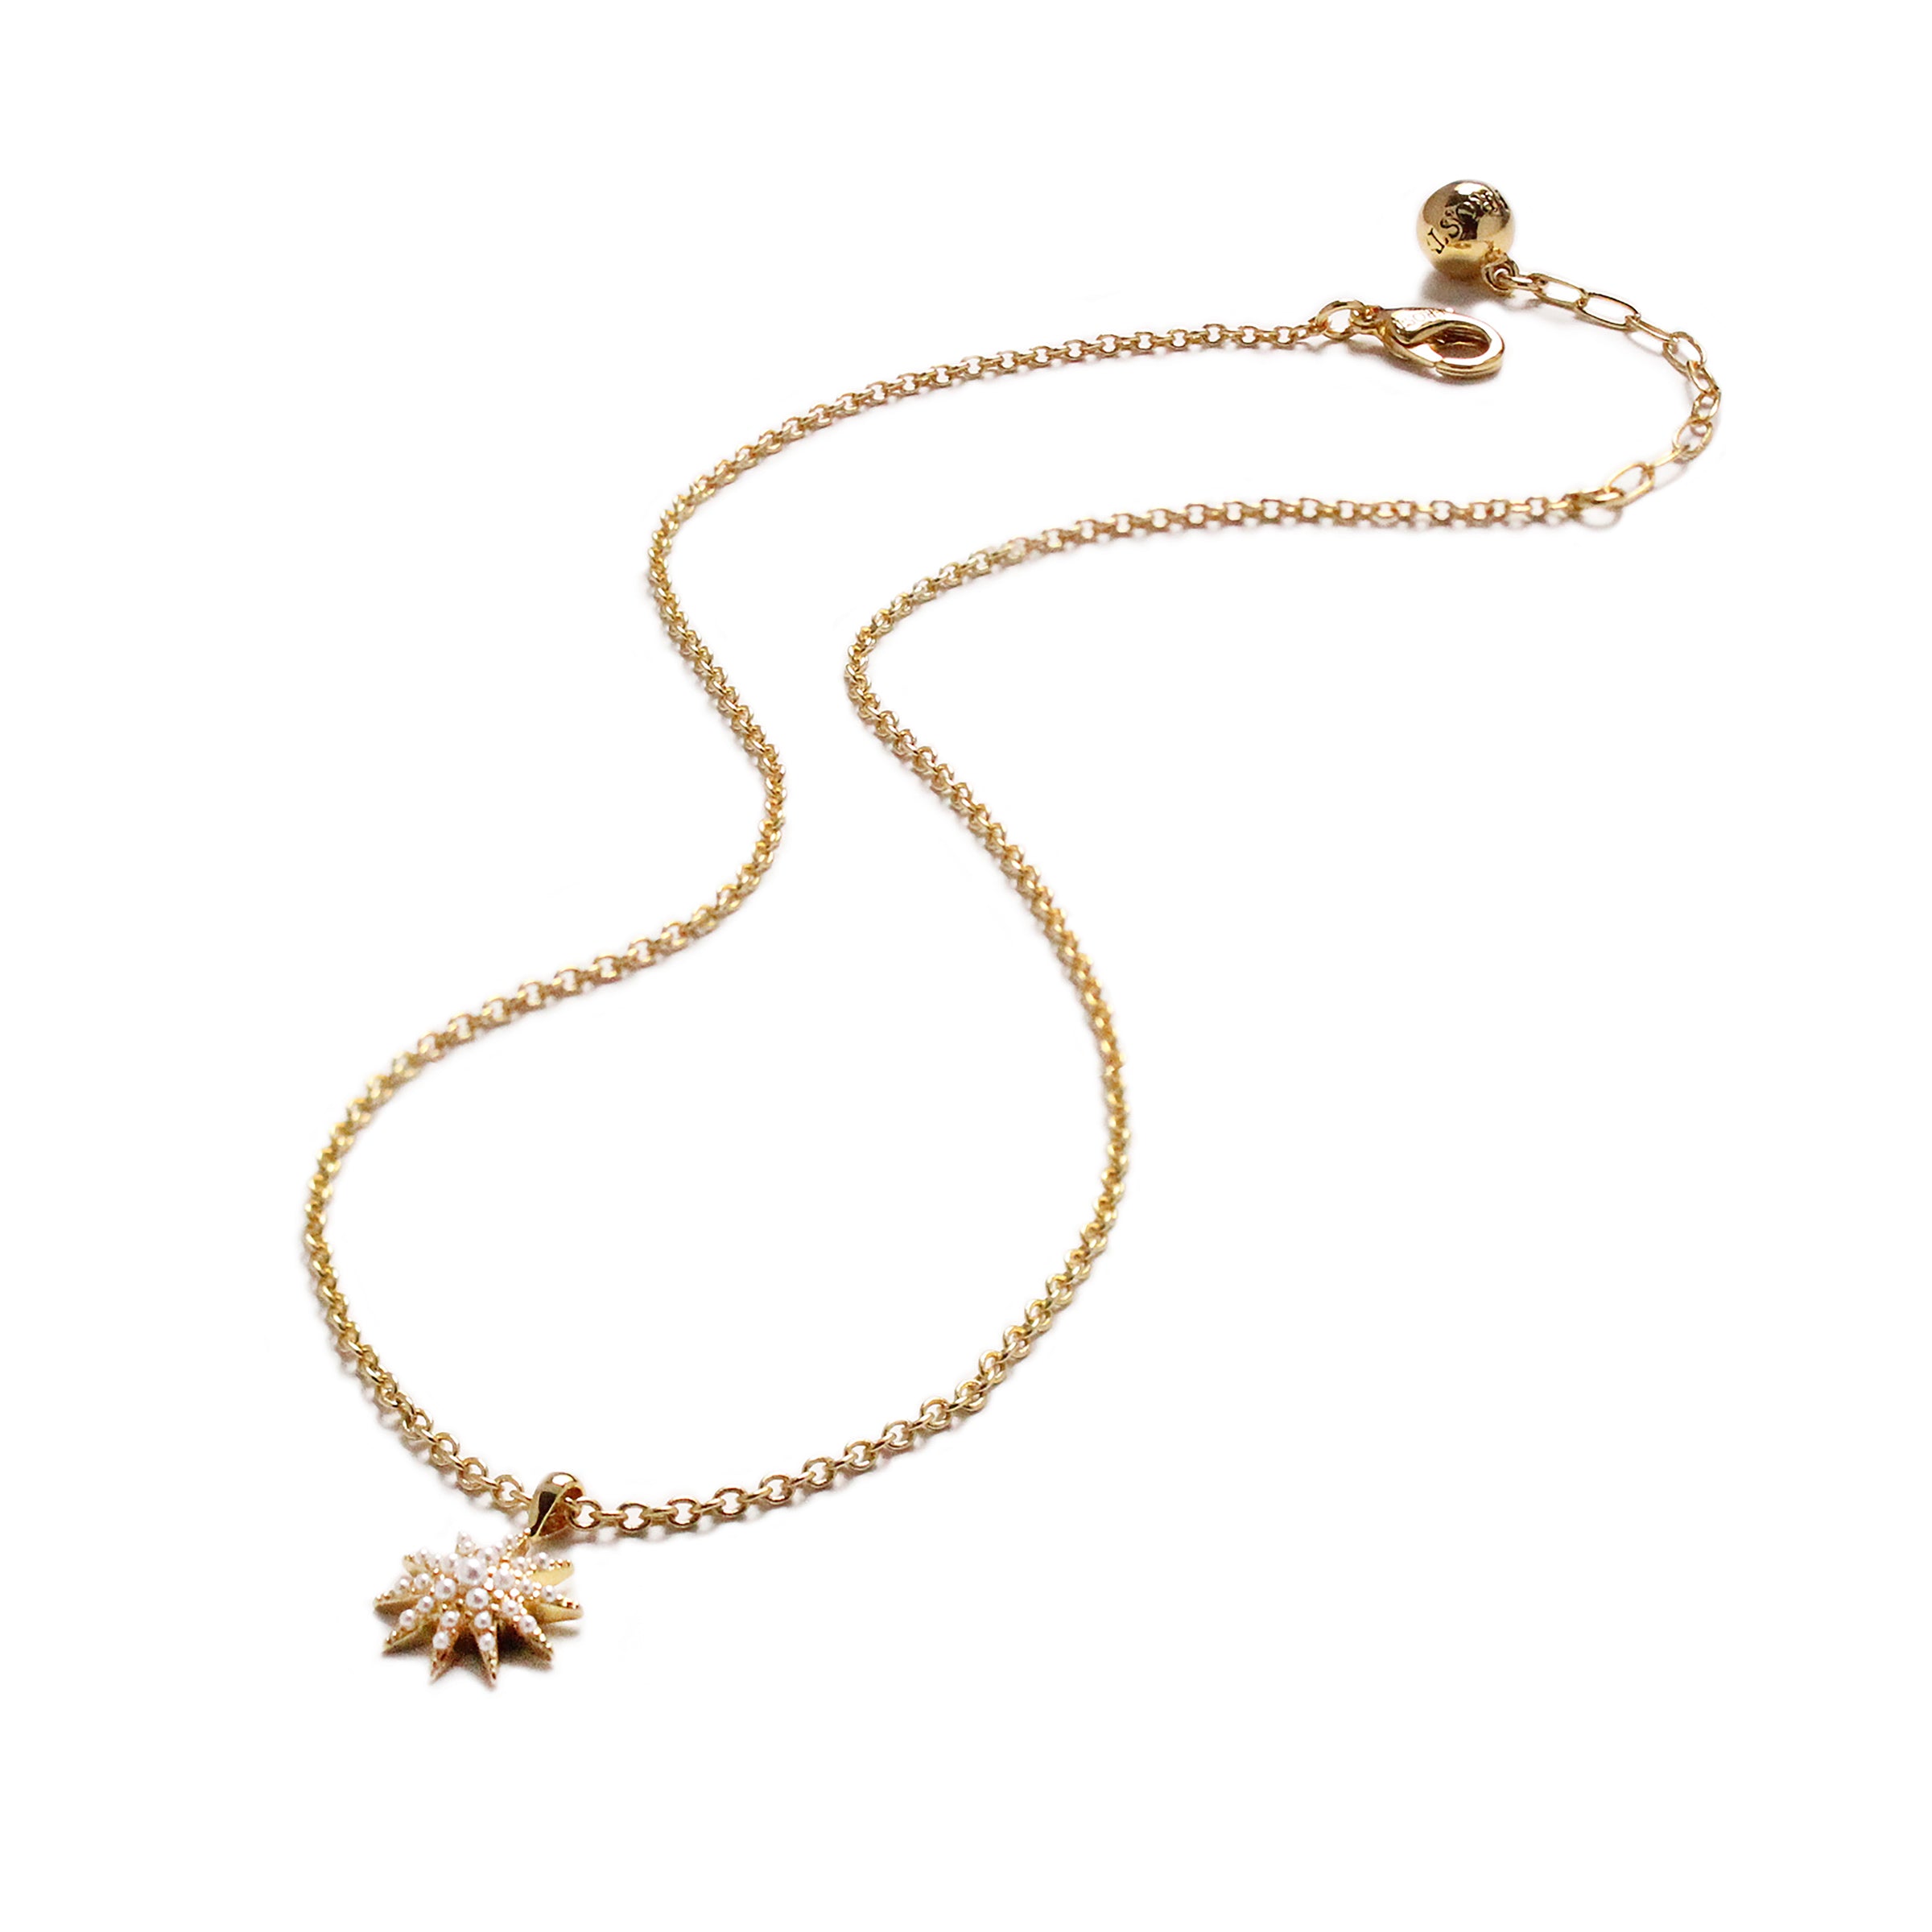 Electra Charm Pendant Necklace - Gold & Pearl